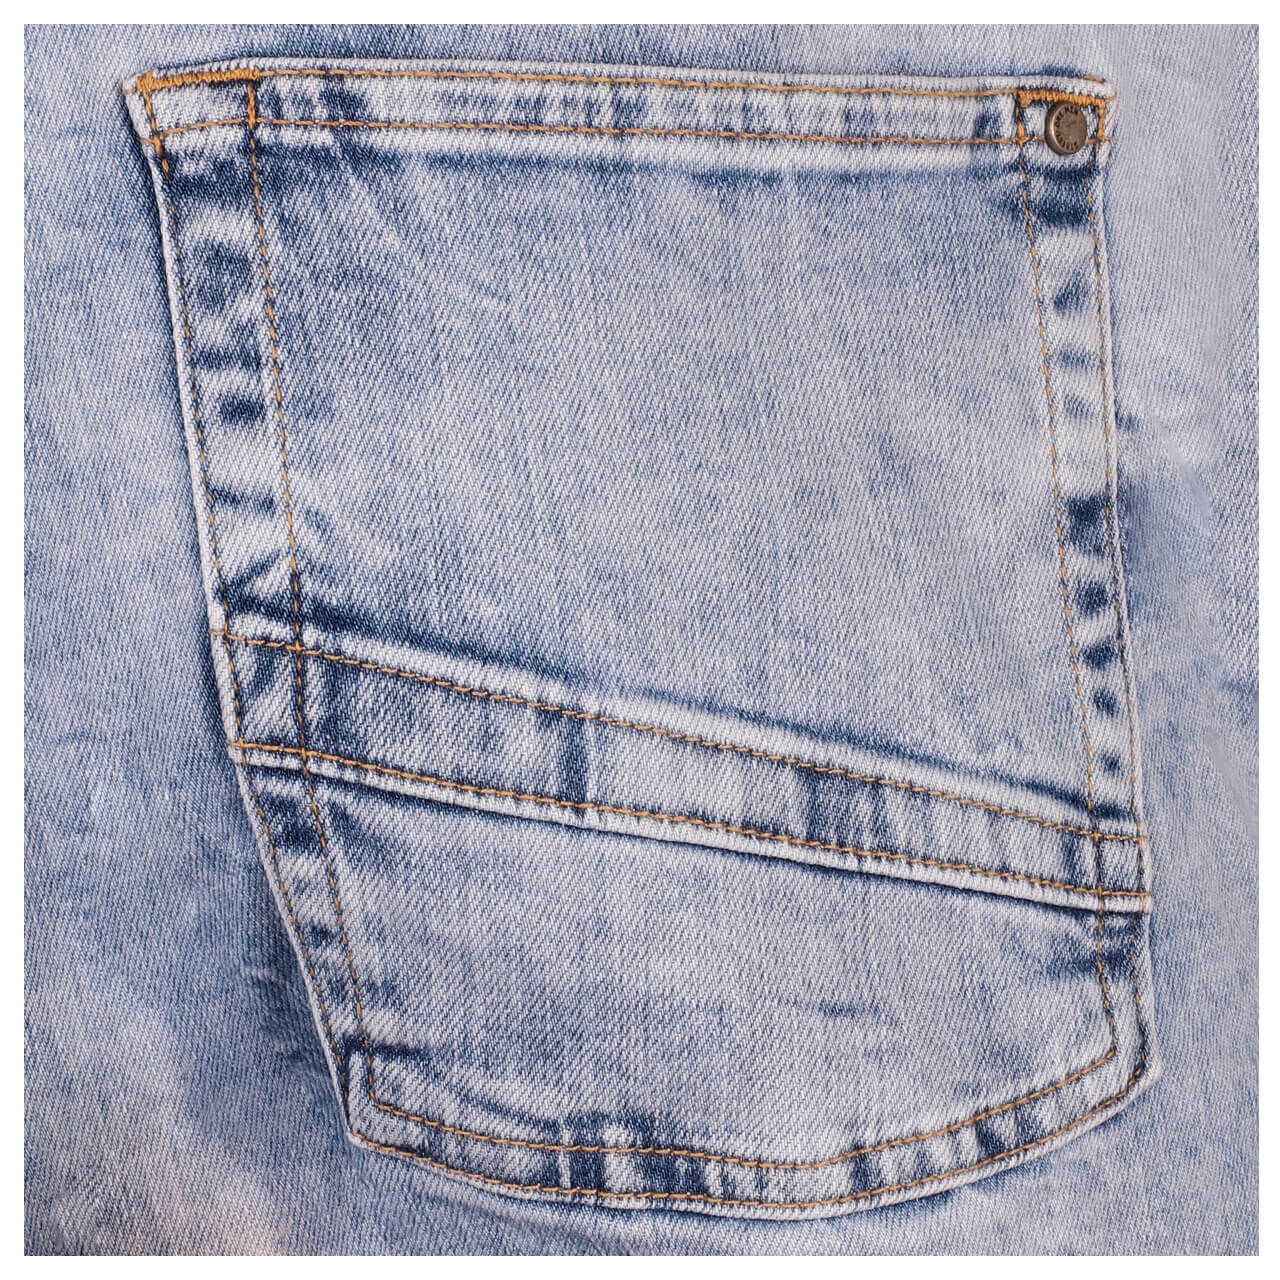 Street One Men Player Jeans blue heavy bleached